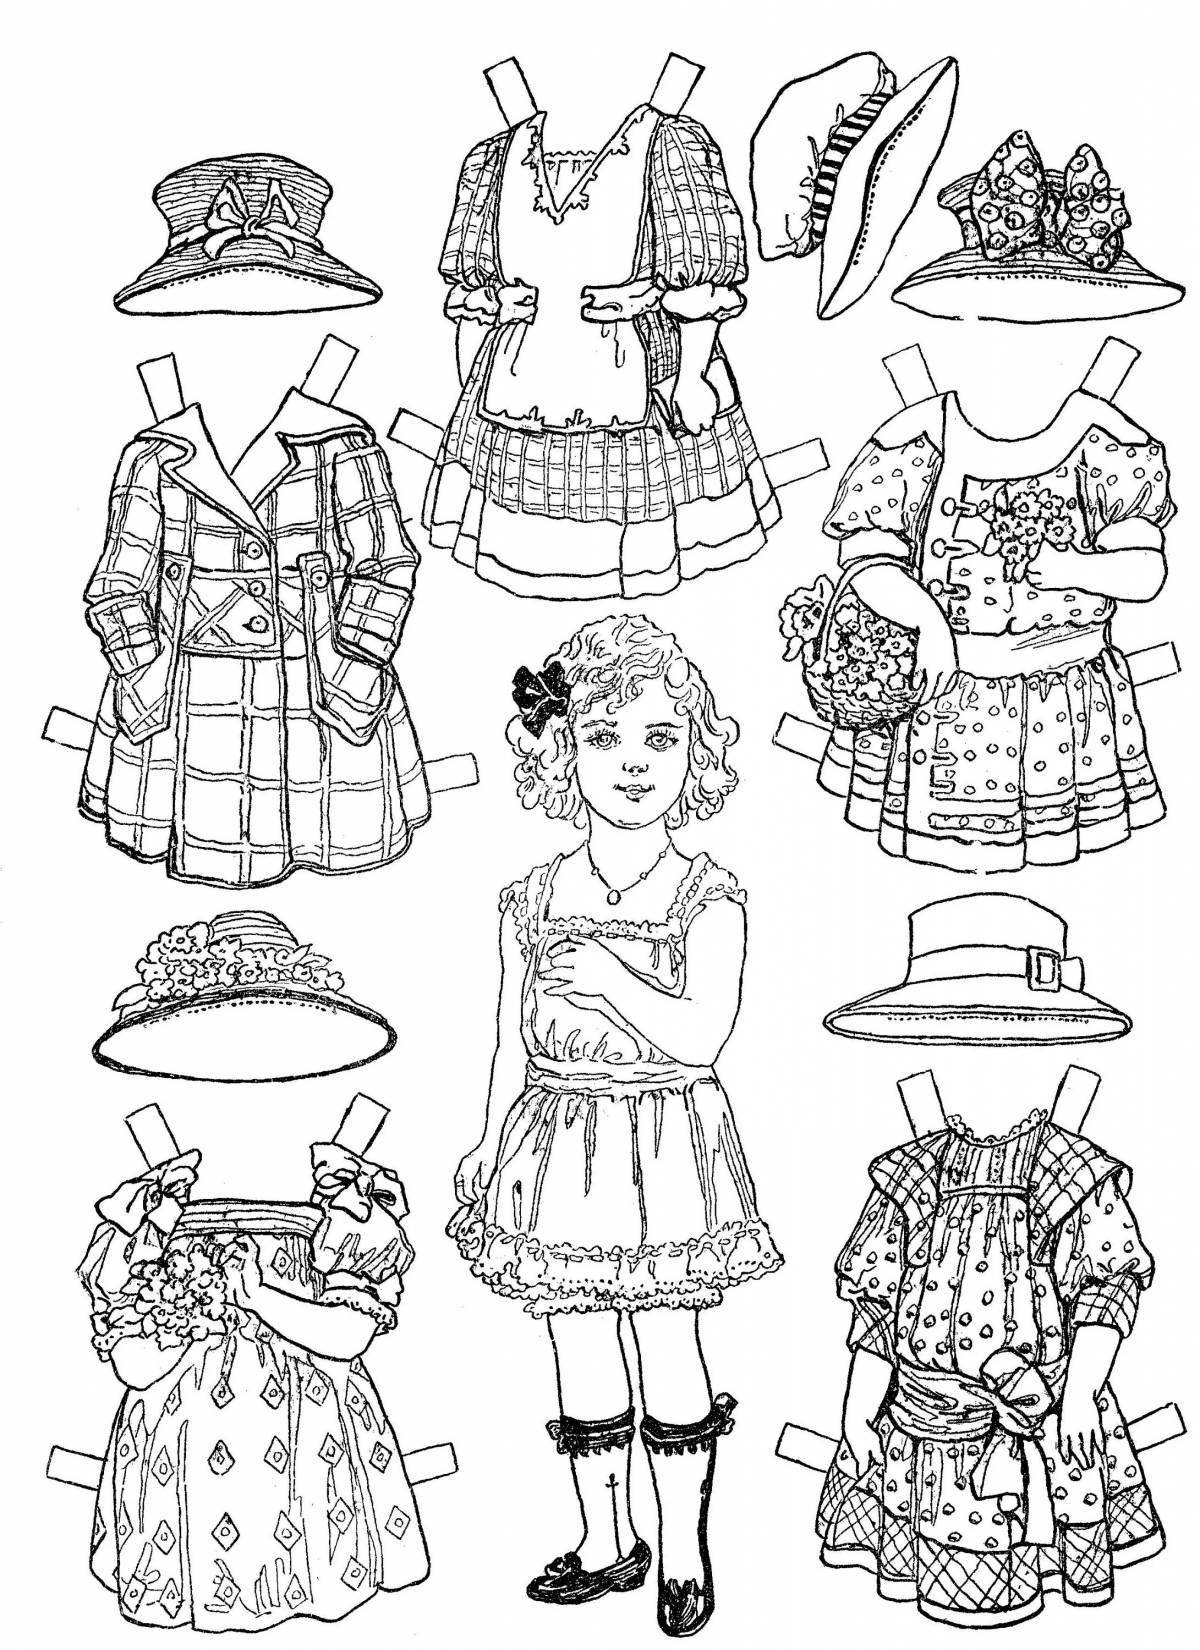 Charming jersey coloring page